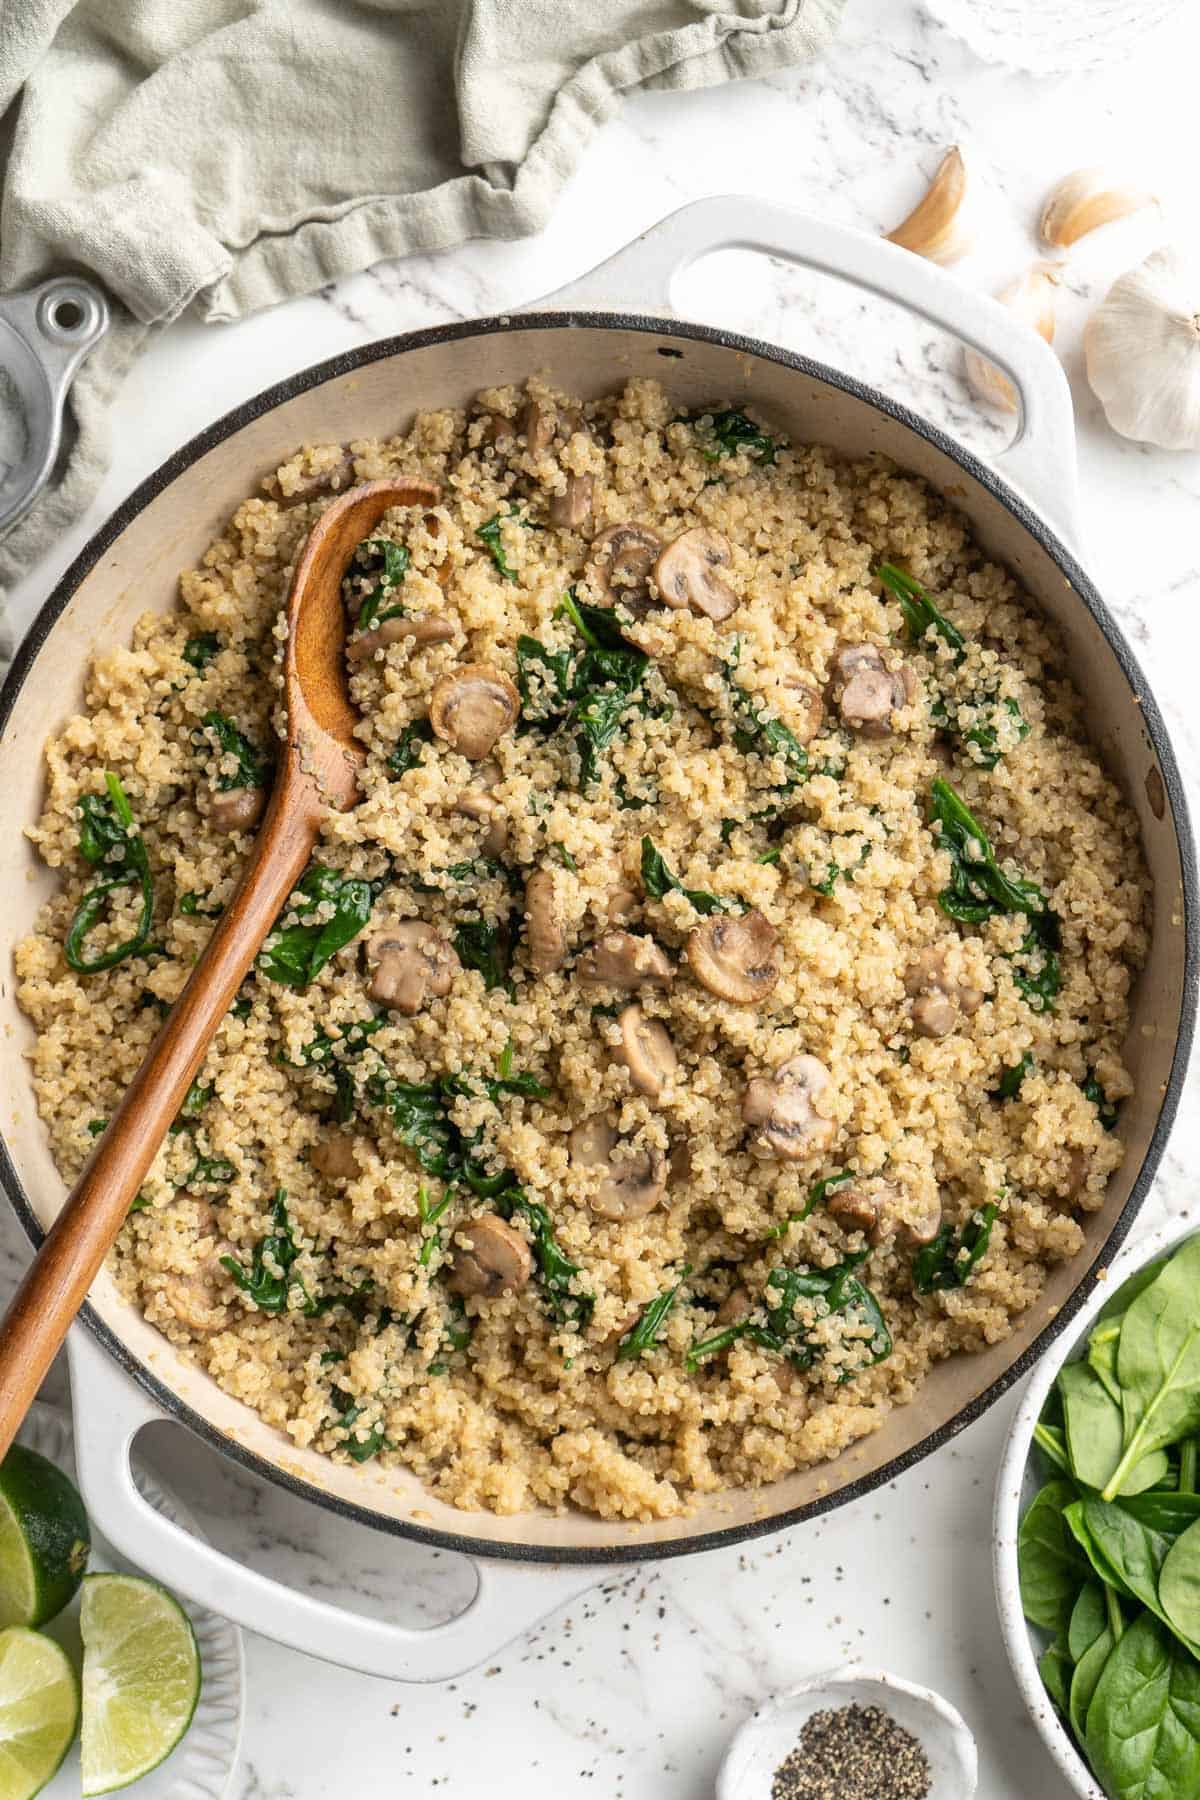 Overhead view of coconut creamy spinach and mushroom quinoa in skillet with wooden spoon